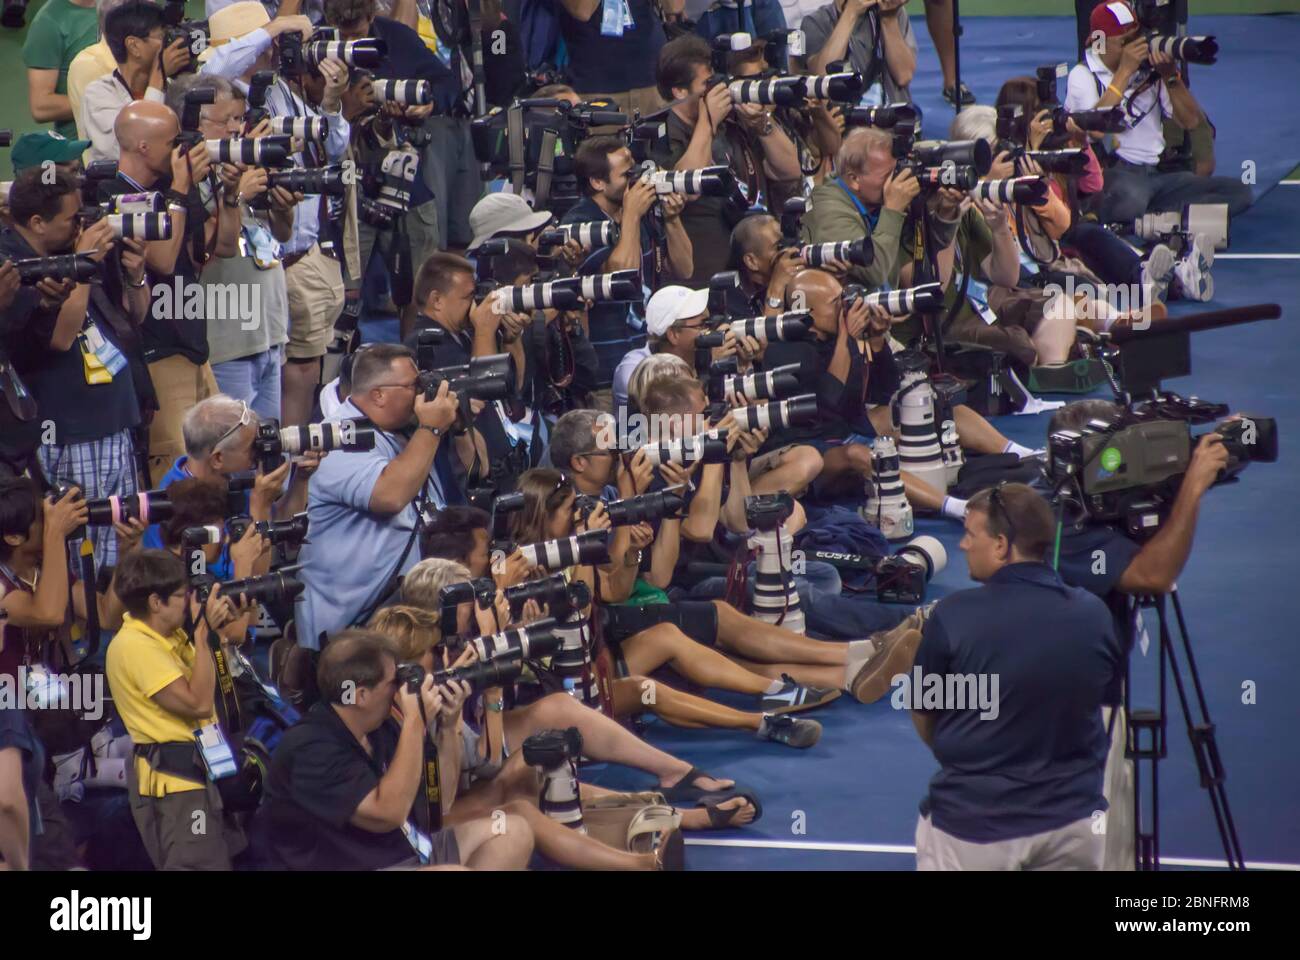 Press photographers at the 2011 final of US Open Tennis tournament, Flushing Meadows-Corona Park, Queens, New York, USA Stock Photo